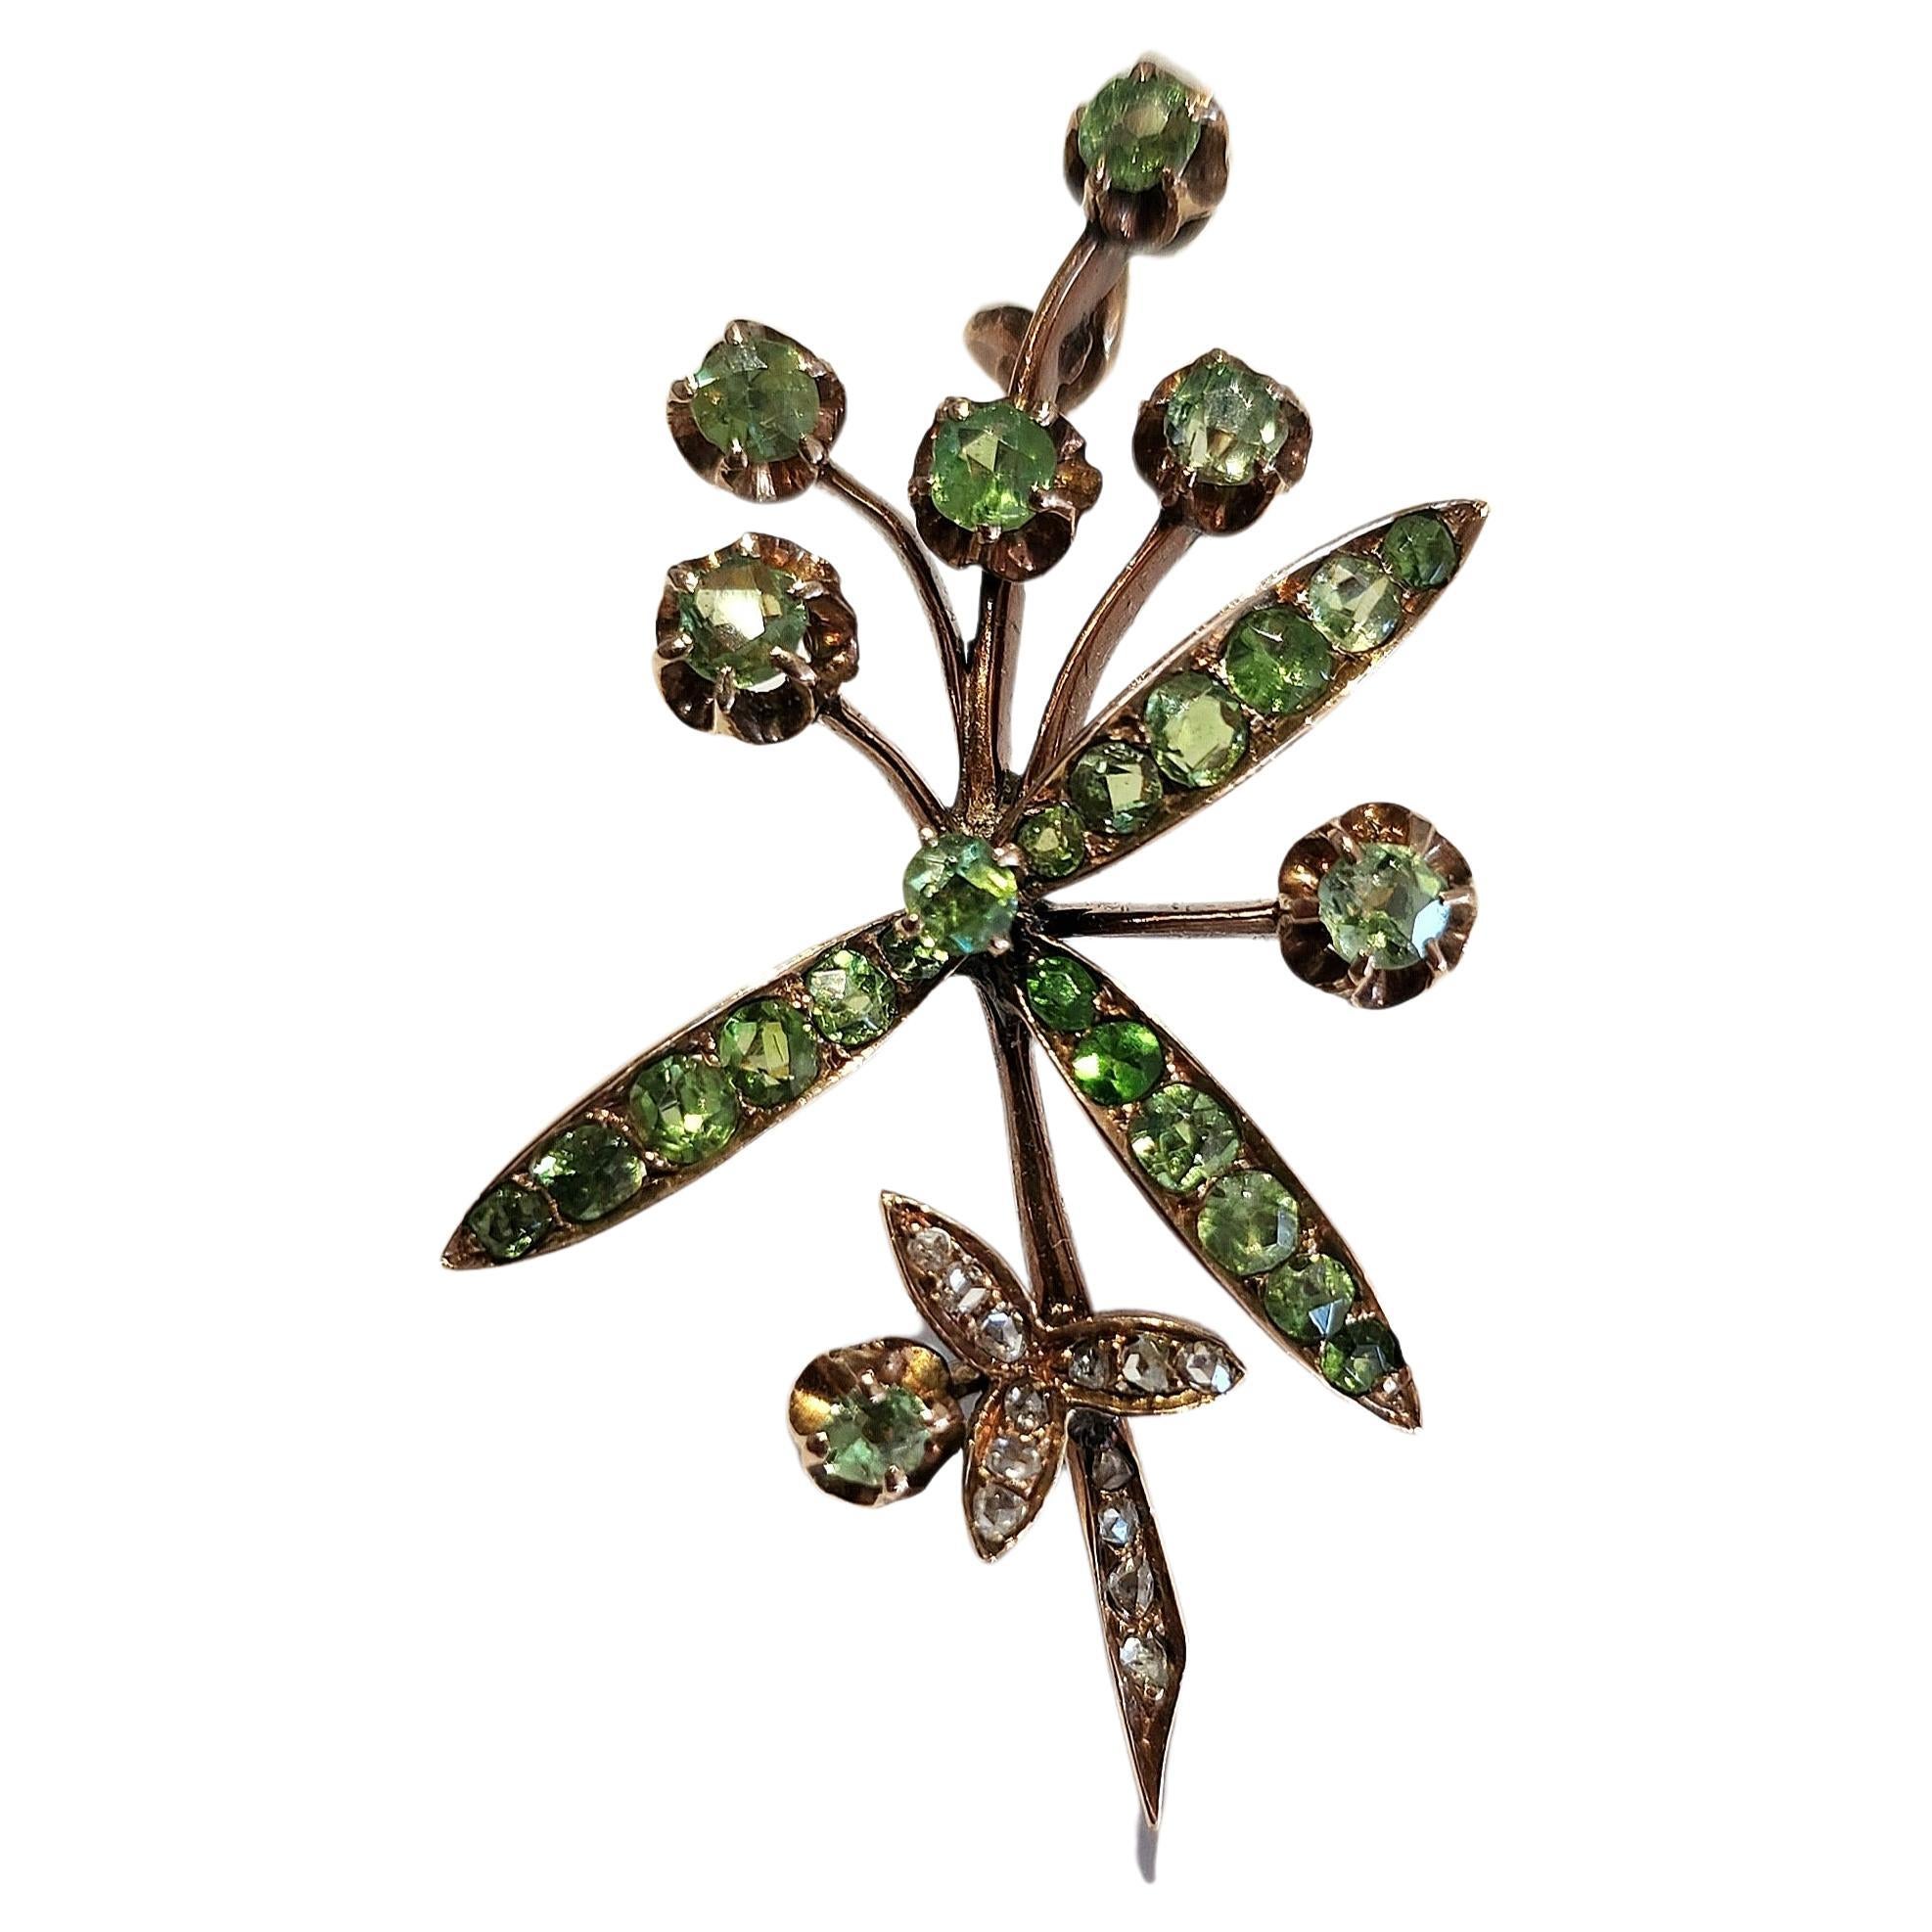 Antique 14k gold brooch with russian green demantoid stones Excellent fire spark in tremplant designe brooch was made in moscow 1916/1920.c with total lenght of 4.5cm hall marked 583 for 14k gold and moscow assay mark and initial maker mark